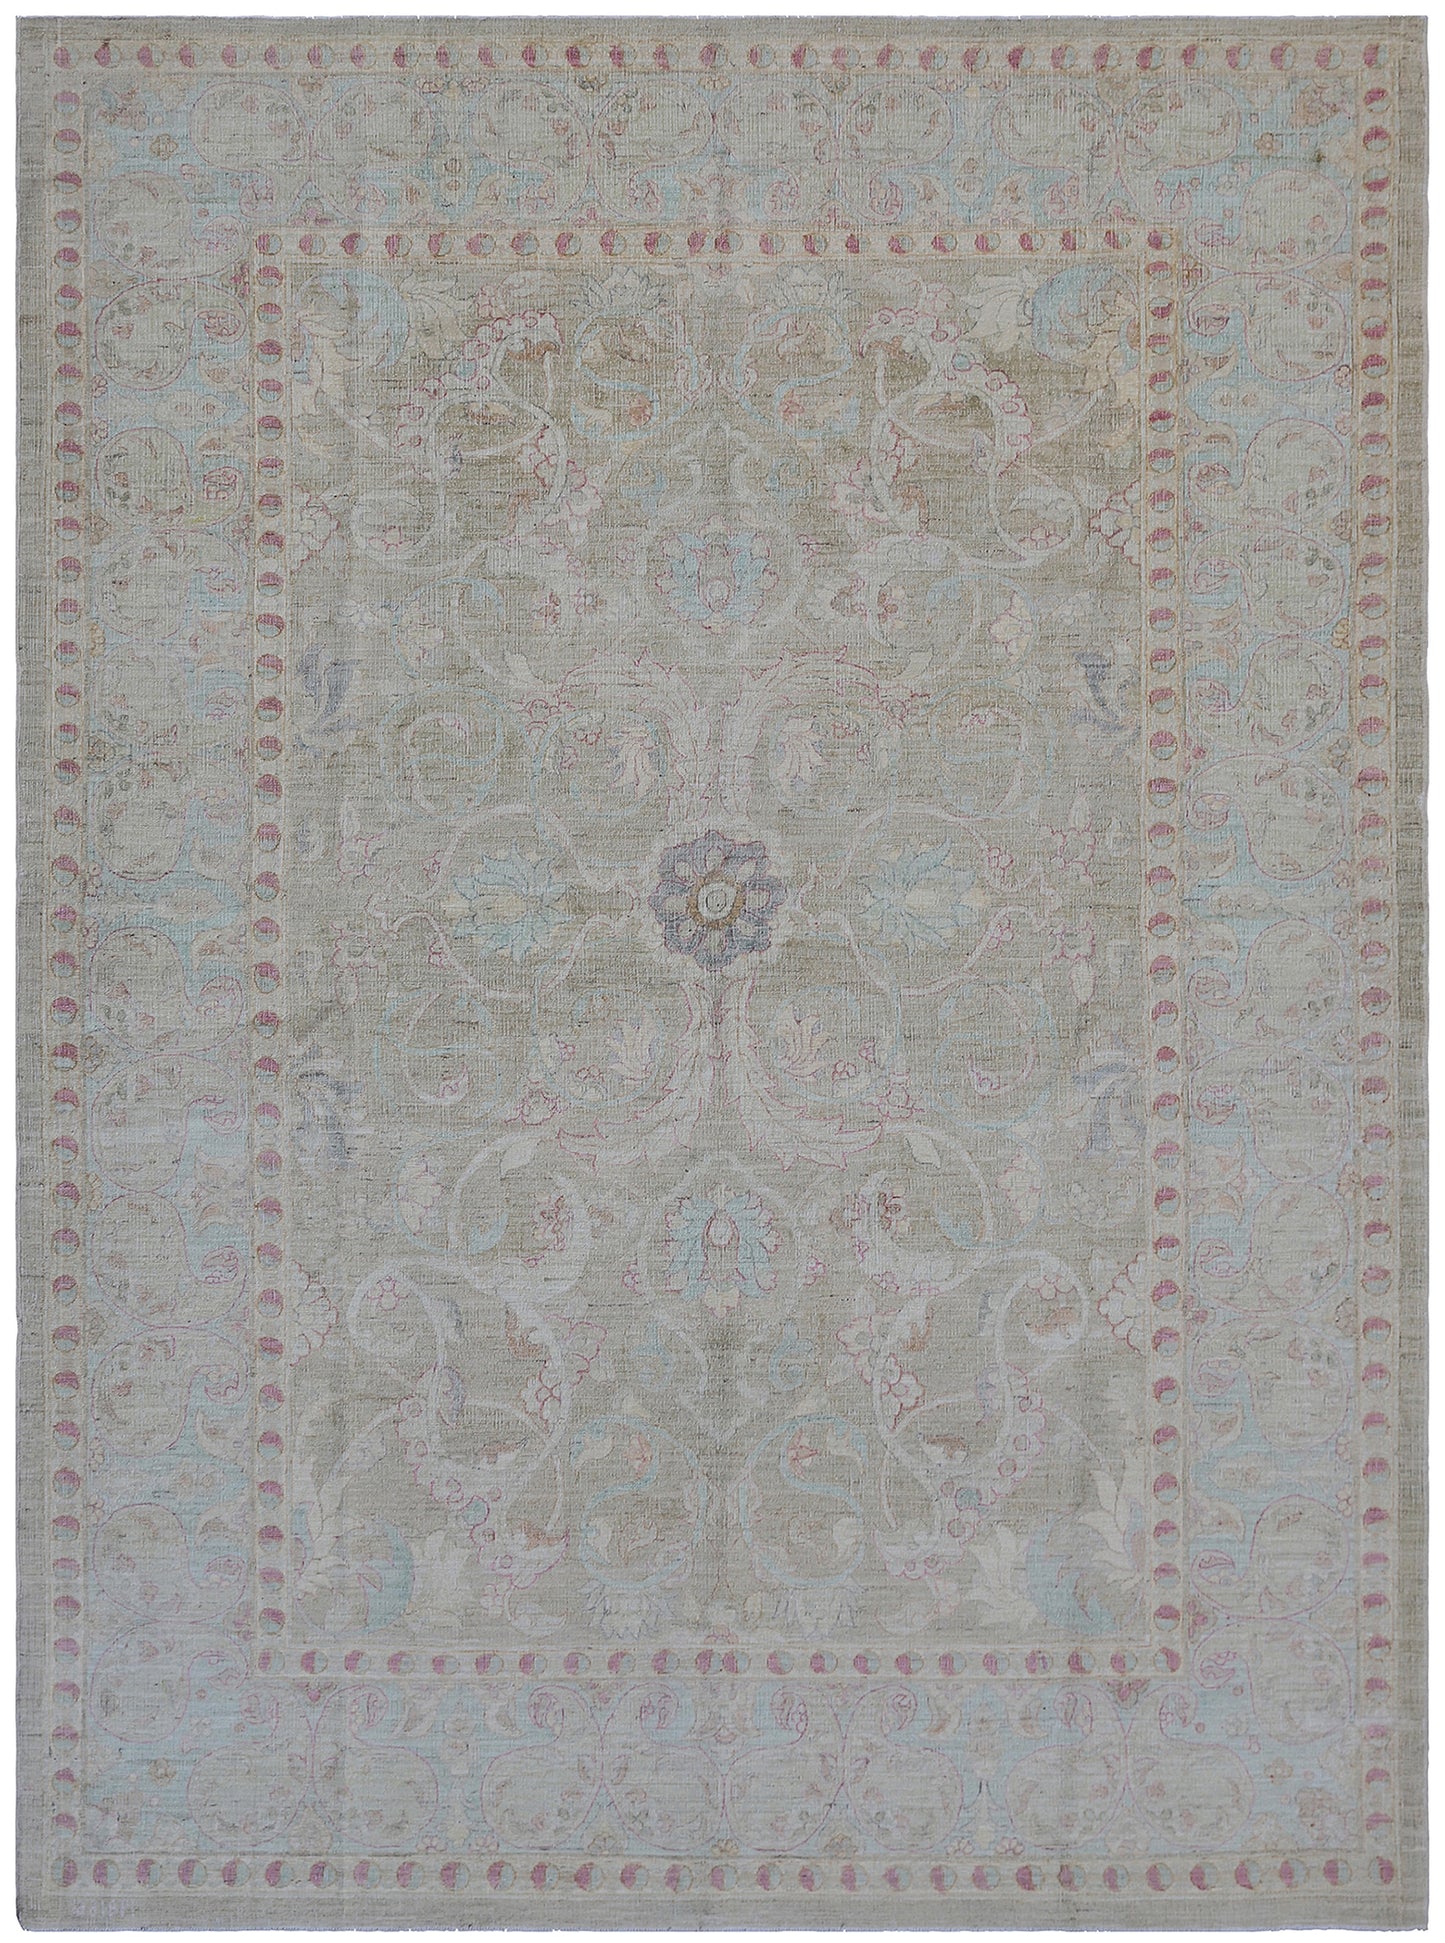 5'x7'Ariana Fine Quality Gold Silver Blue Wool and Silk Luxury Polonaise Design Rug